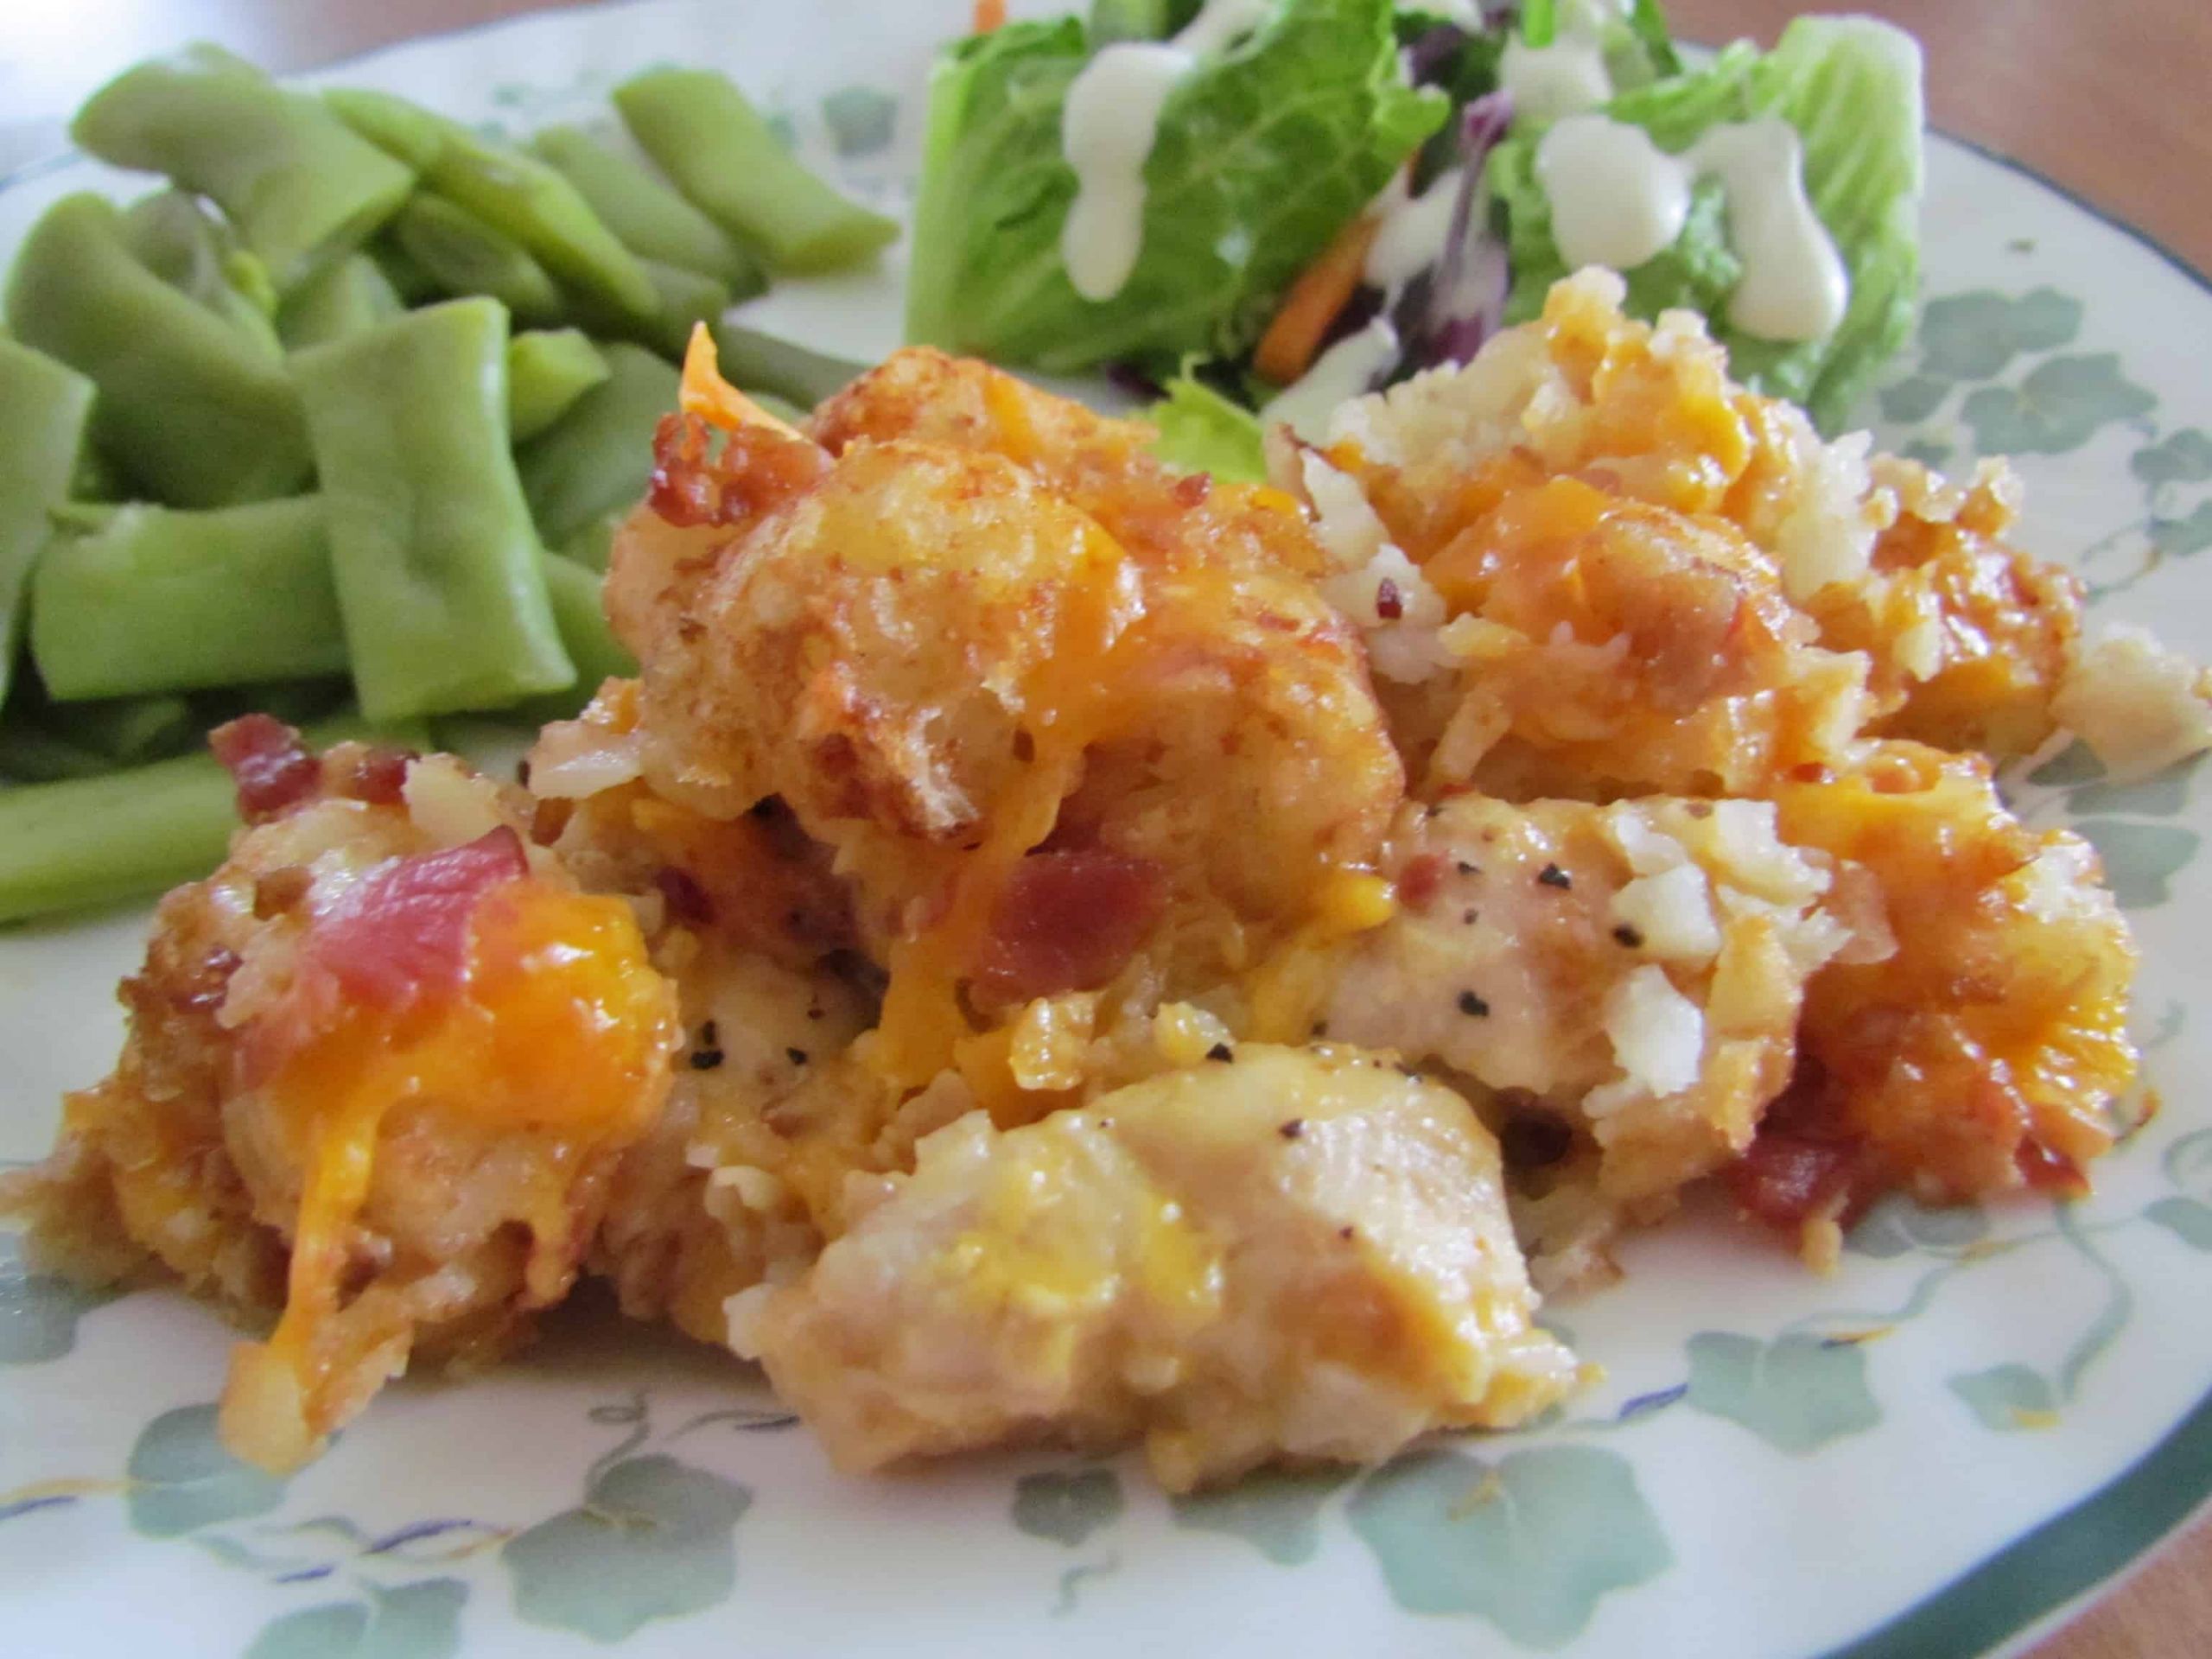 15 Recipes for Great Cheesy Chicken Tater tot Casserole